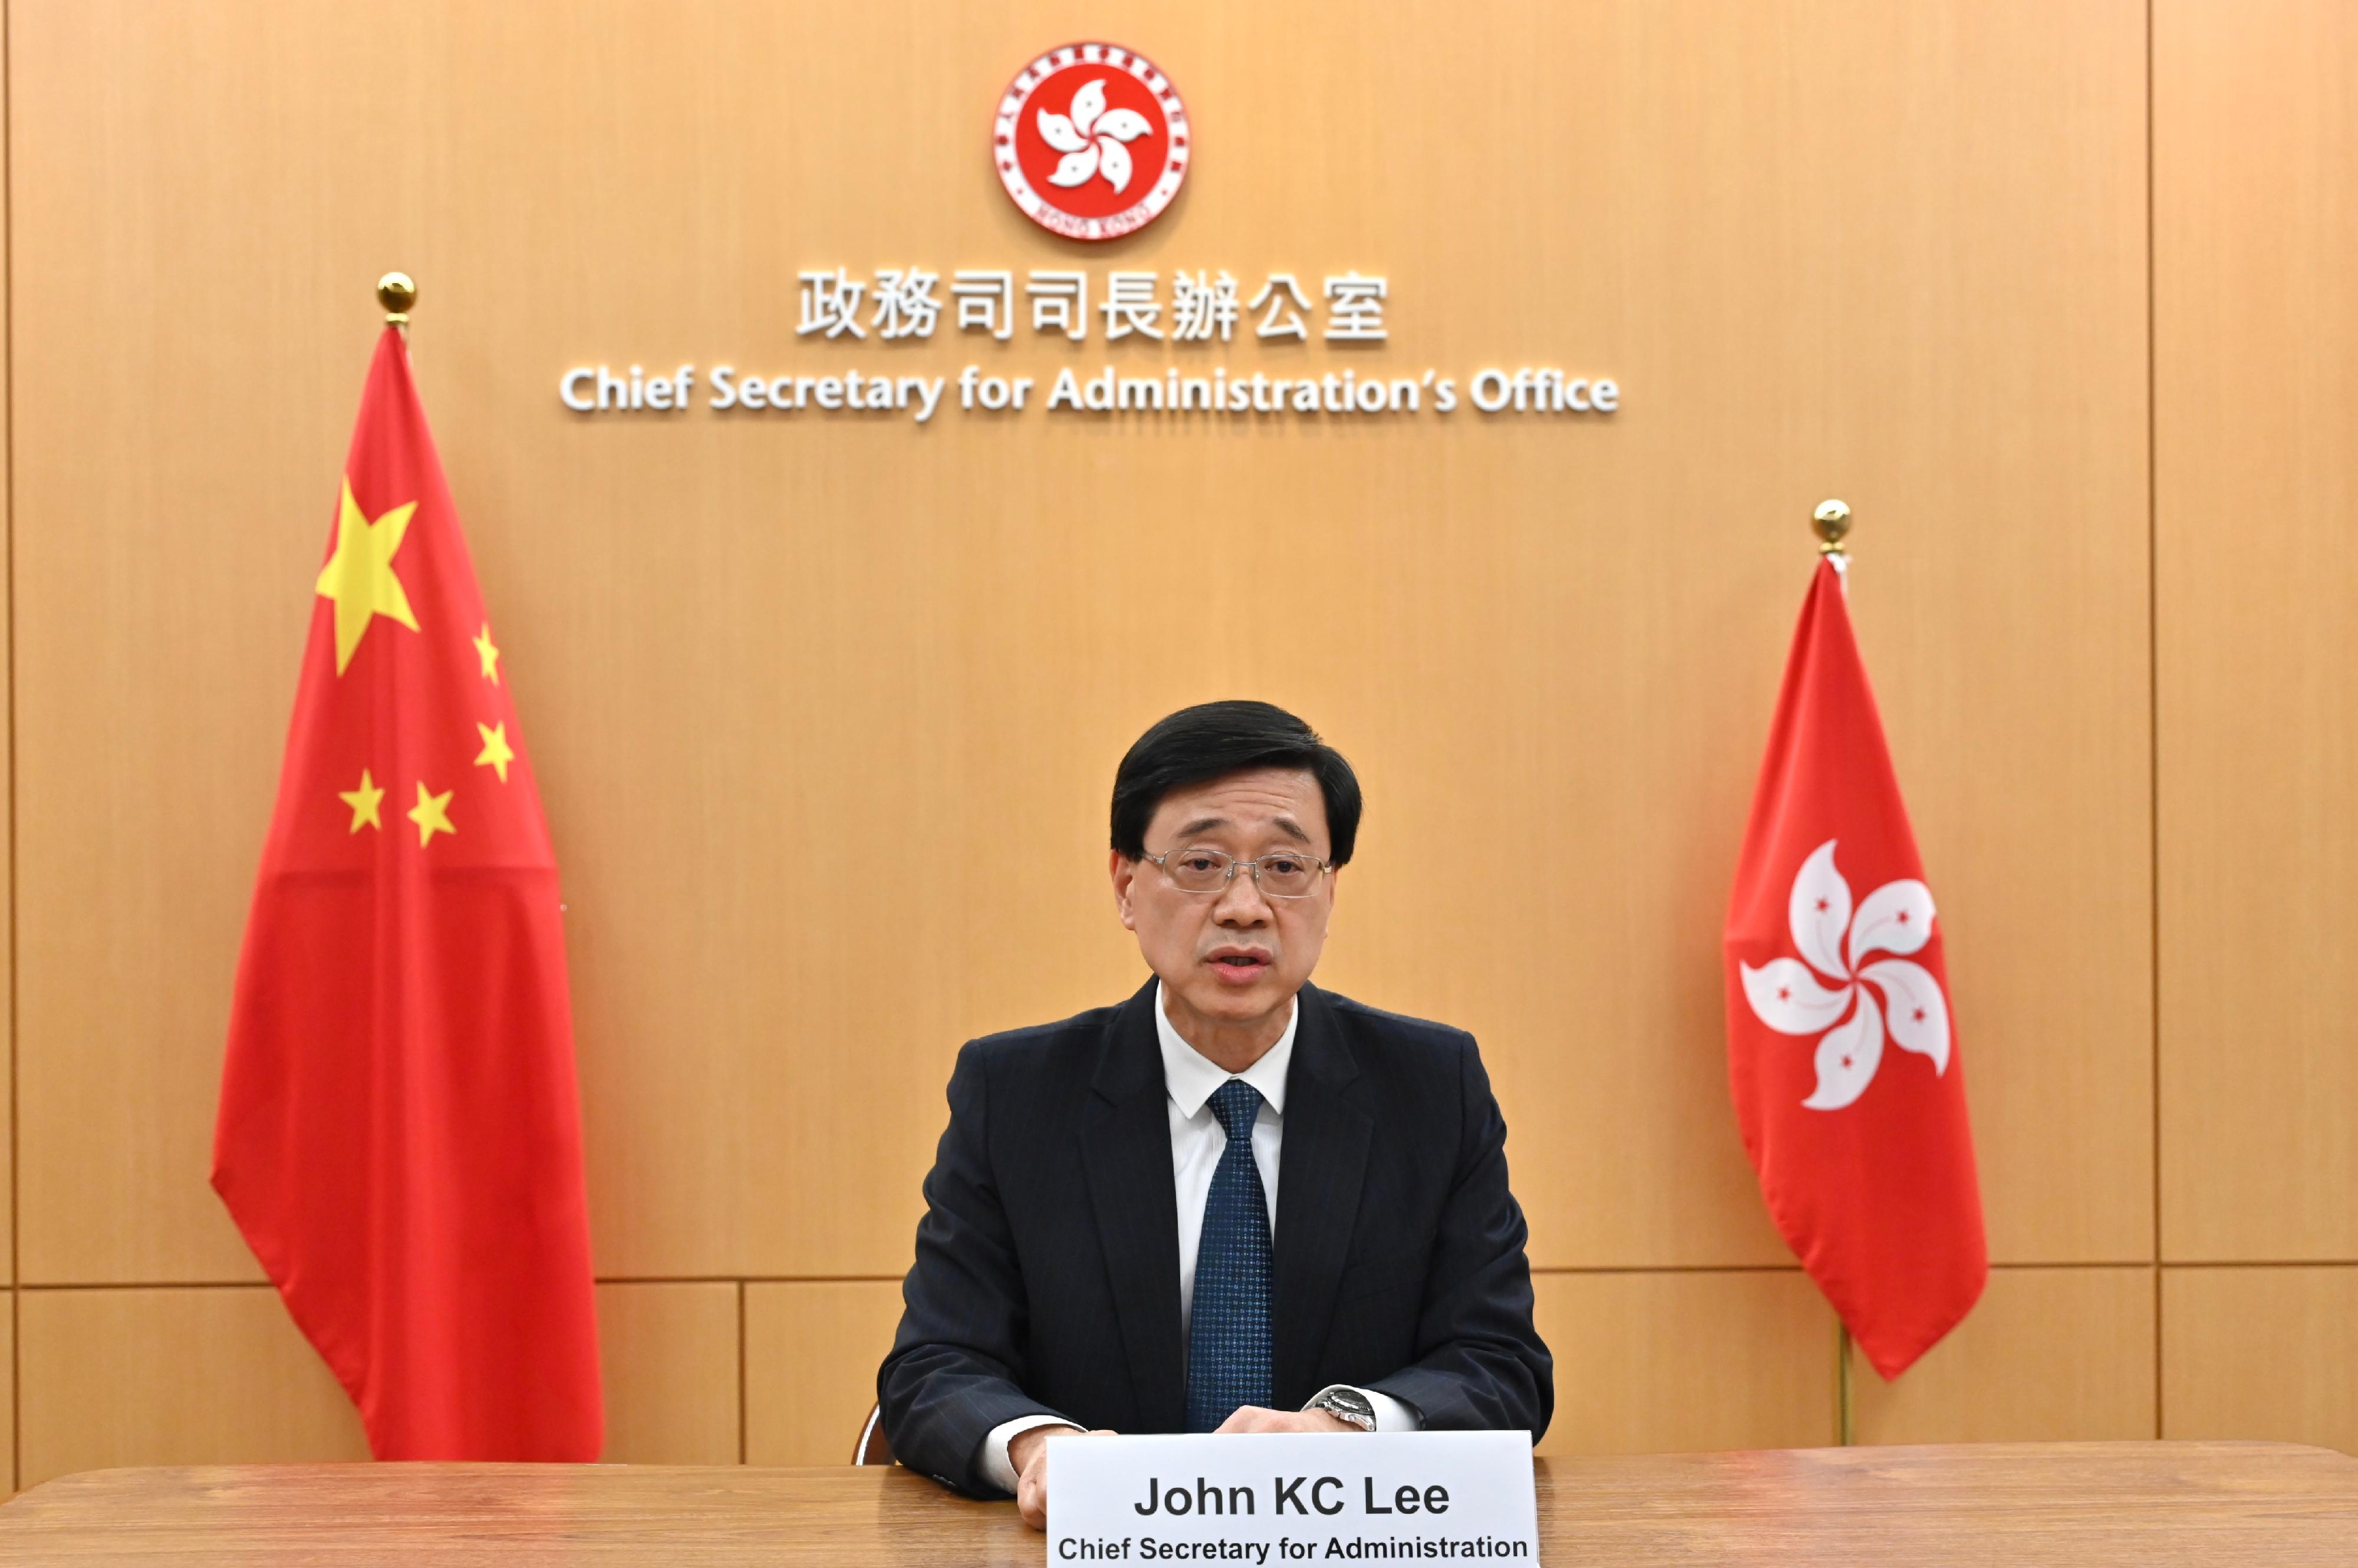 The Chief Secretary for Administration, Mr John Lee, delivers a speech at the online side event on Hong Kong-related issues organised by the Permanent Mission of the People's Republic of China to the United Nations Office at Geneva during the 49th session of the United Nations Human Rights Council today (March 16).